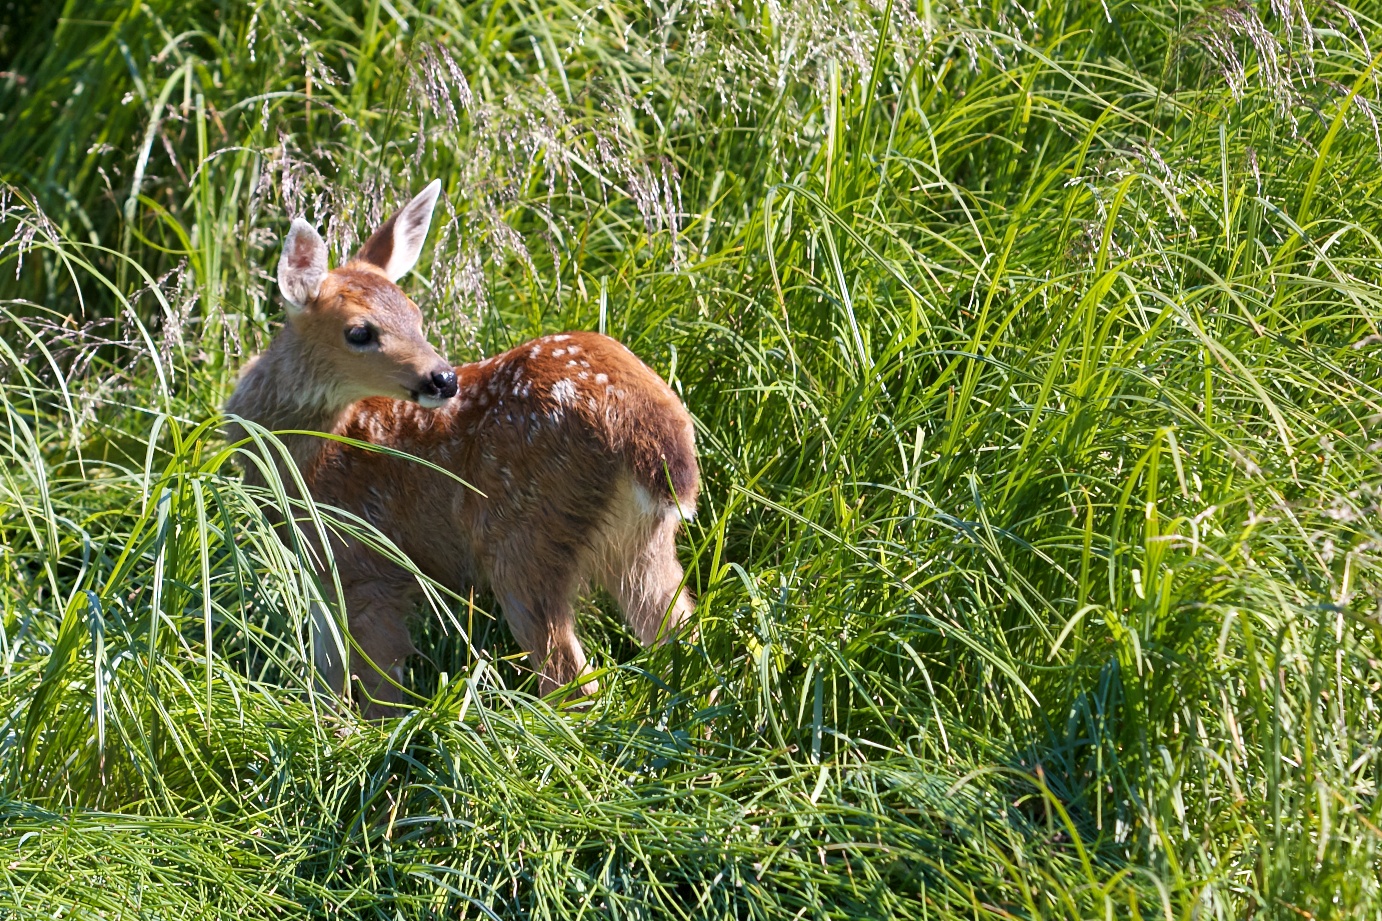 Baby deer after the river cross - Vancouver Island BC Canada